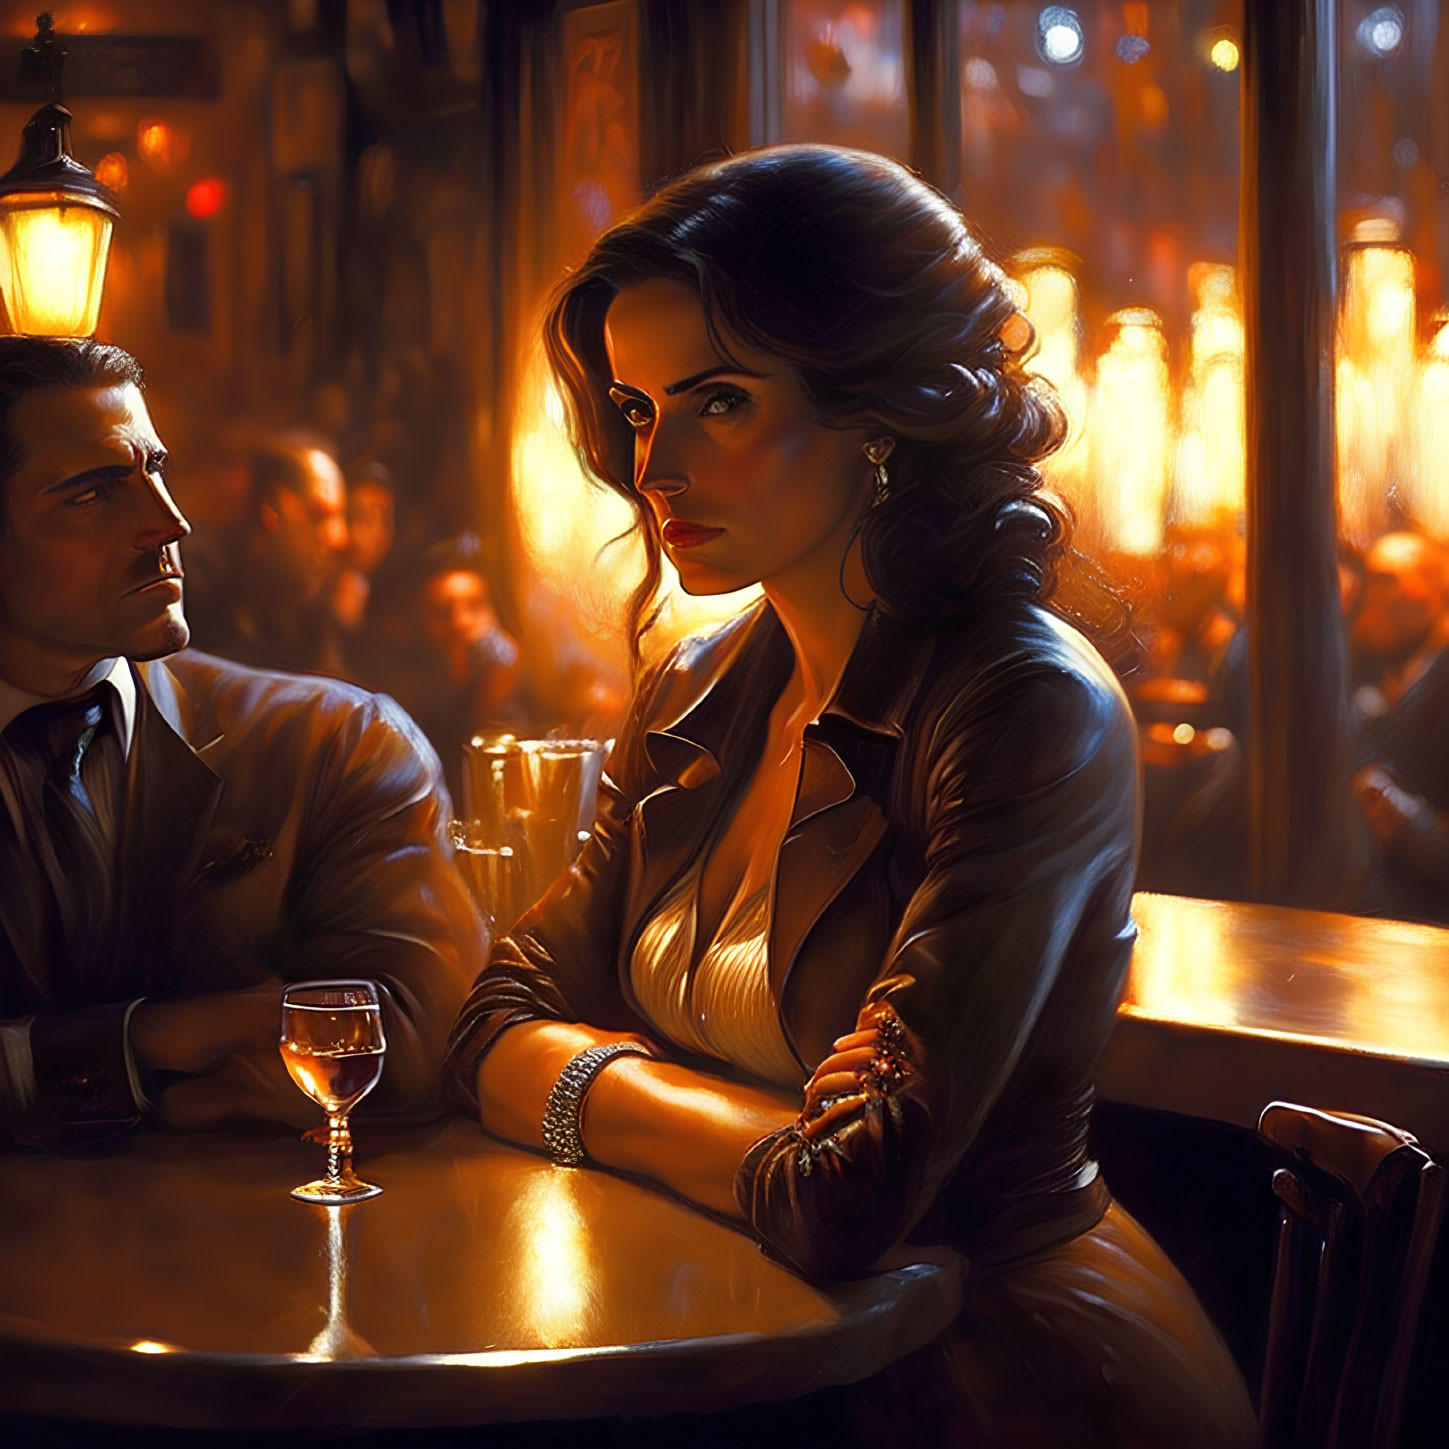 Vintage-style bar scene illustration with man and woman in warm lighting.